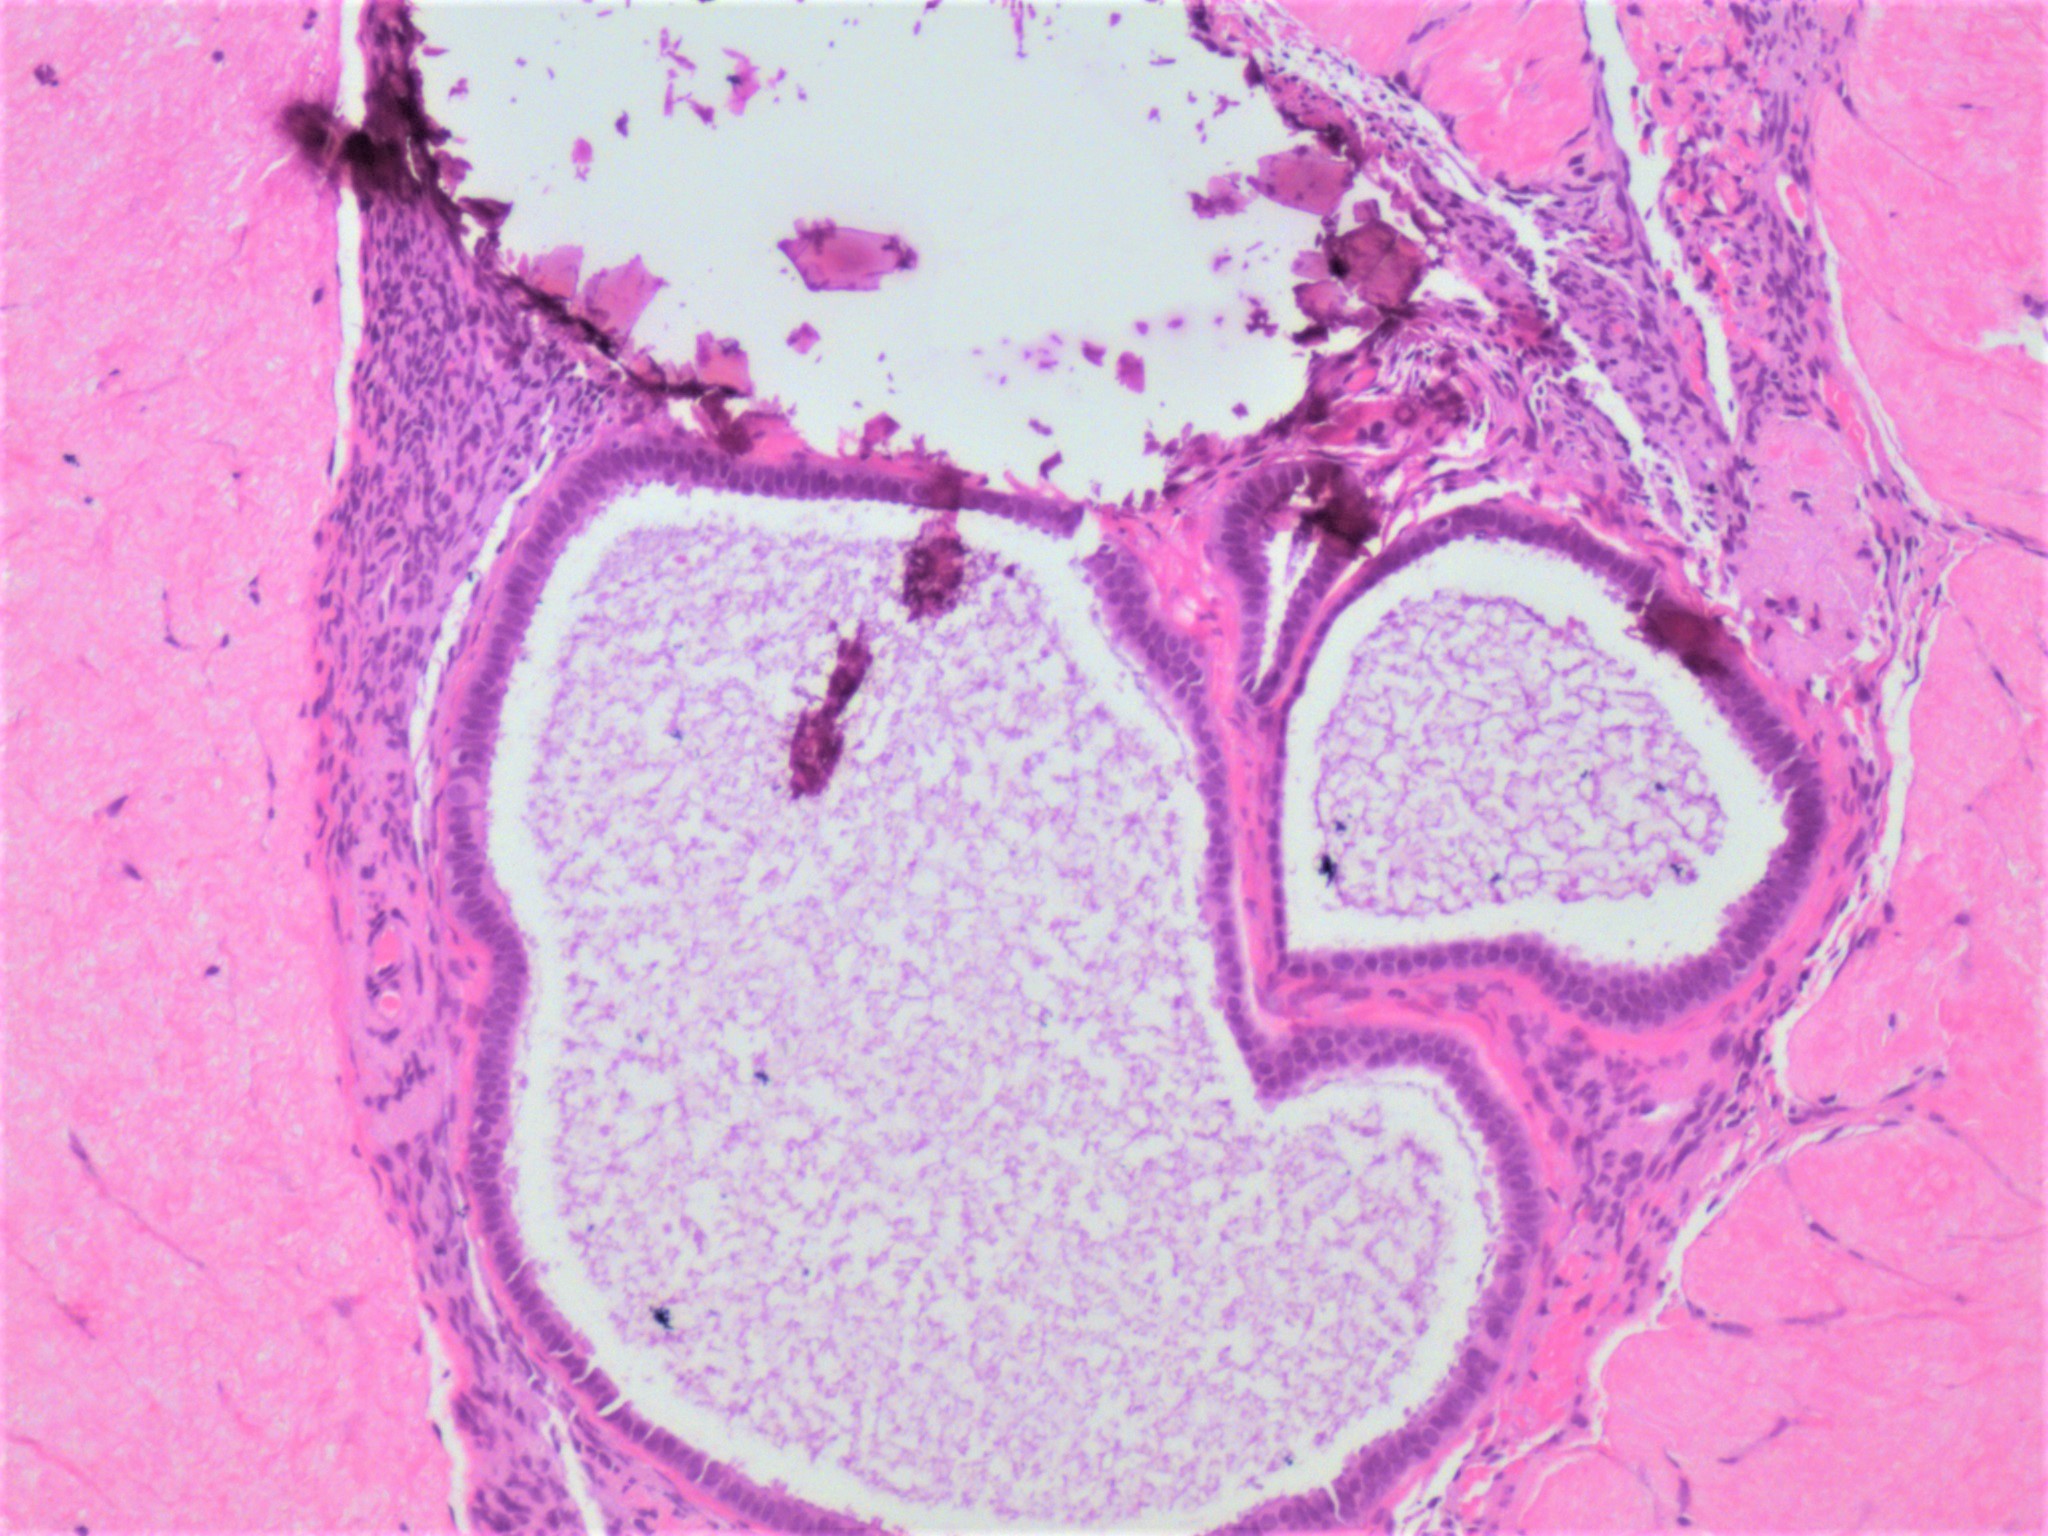 Stromal microcalcifications